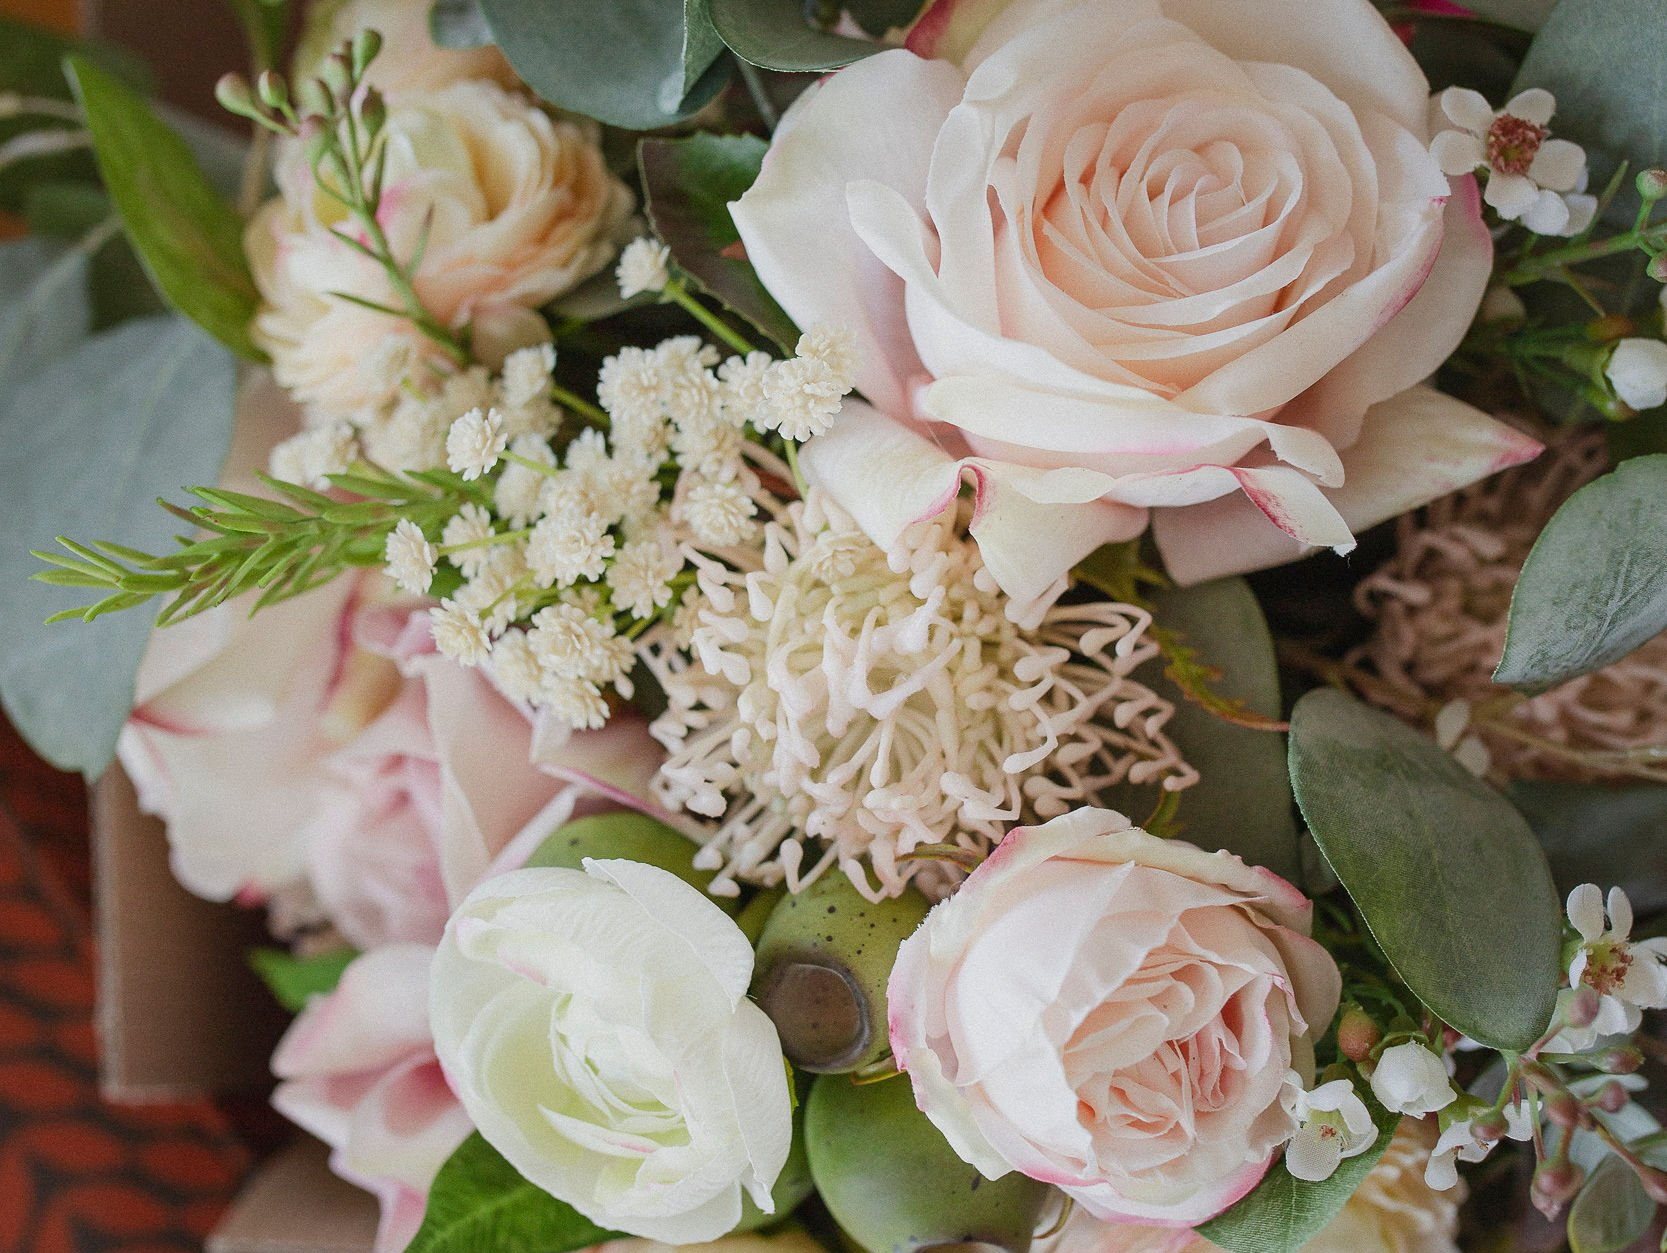 Stunning bridal bouquet, a floral masterpiece from Darwin's skilled florists.